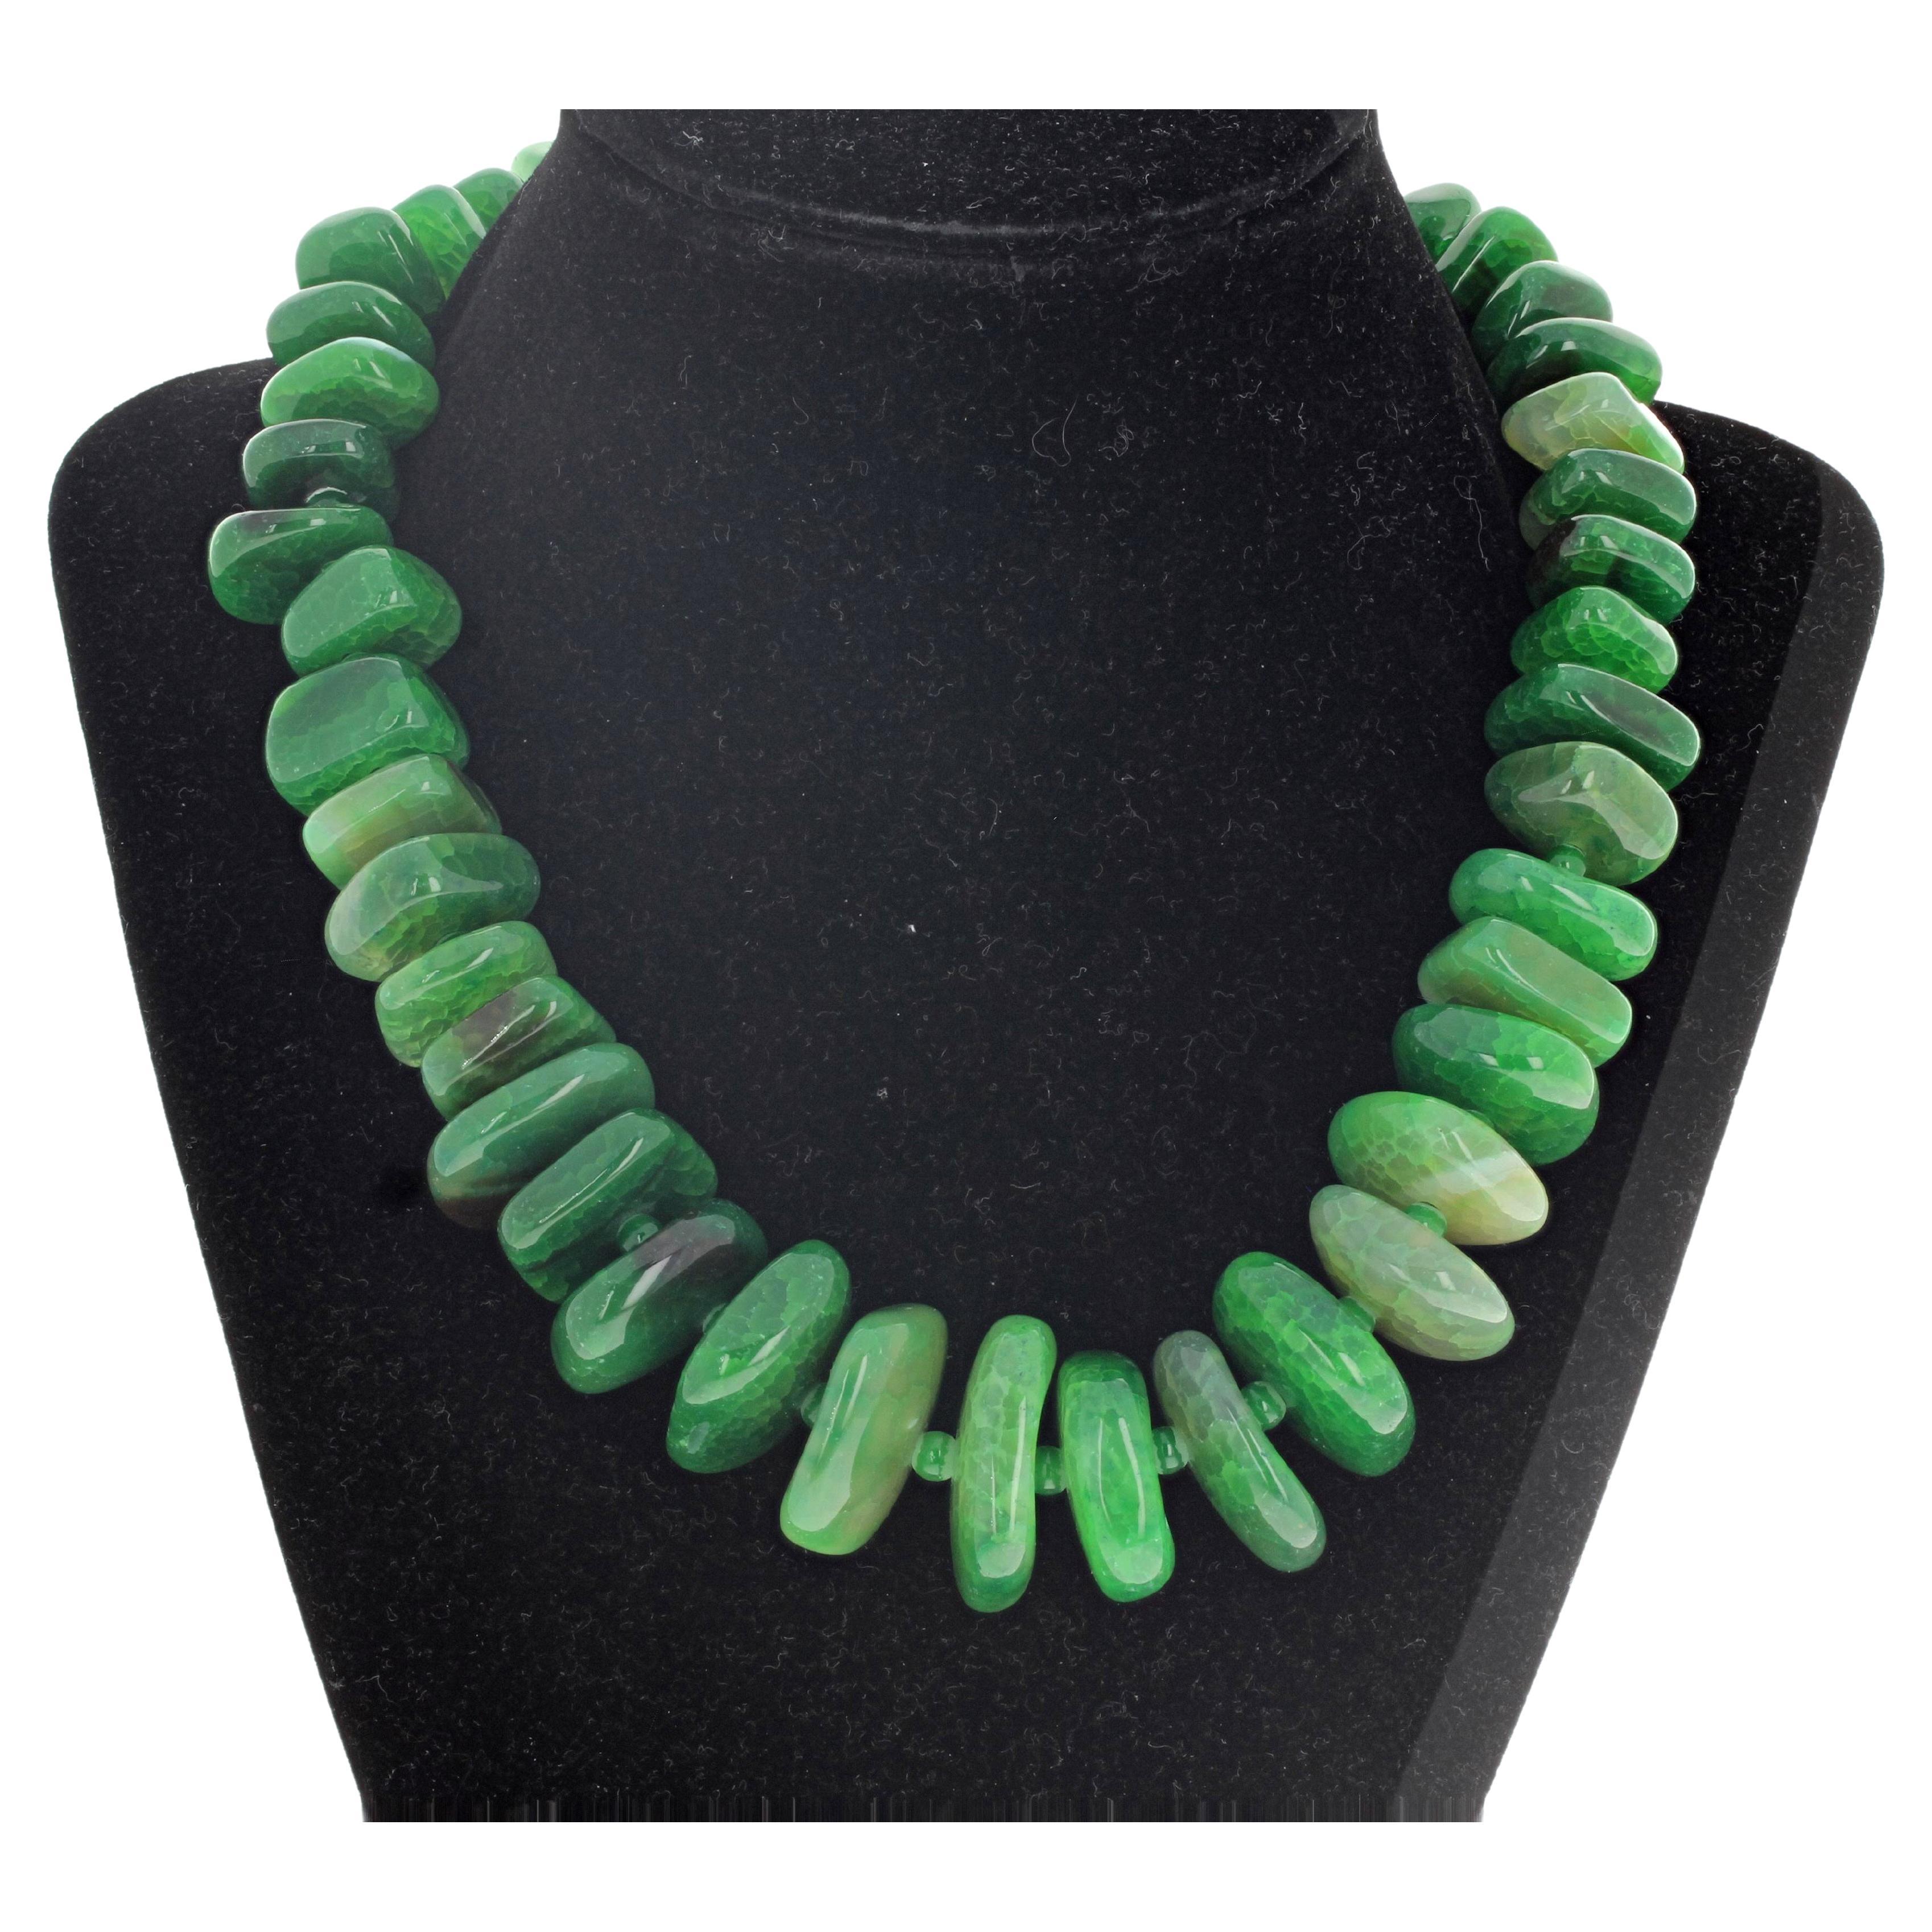 AJD Absolutely Beautiful Green Graduated Natural Irregular Agate Rondel Necklace For Sale